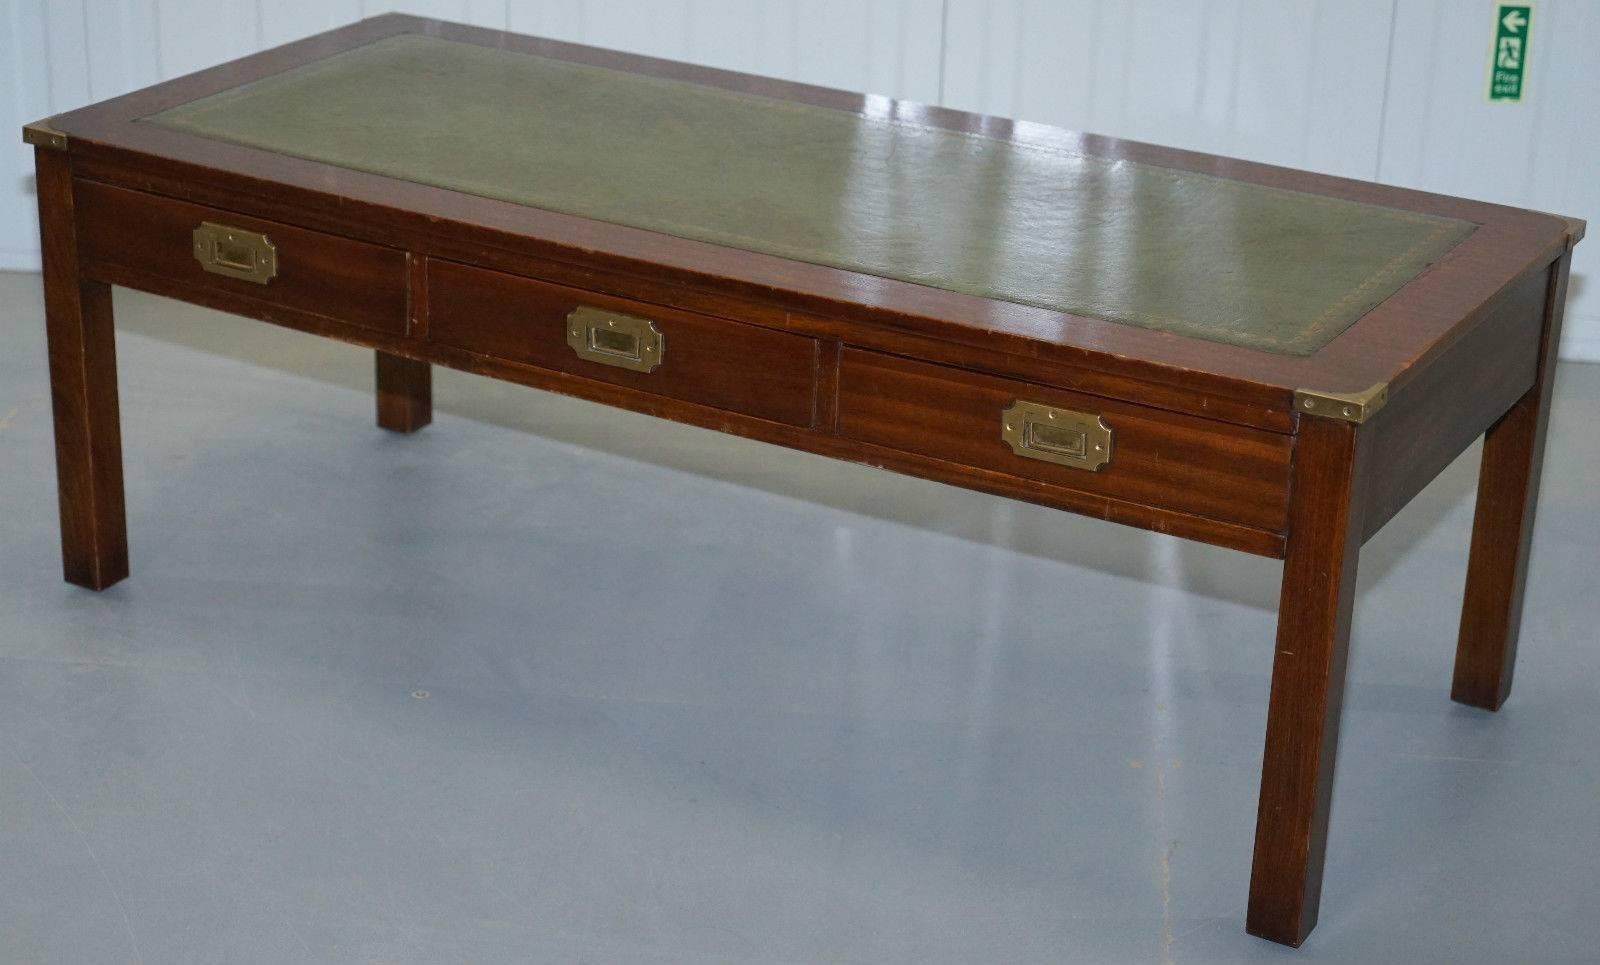 We are delighted to offer for sale this lovely military campaign coffee table with drawers and green leather surface RRP £1825

A rare find in lovely lightly restored condition, we have deep cleaned hand condition waxed and hand polished it from